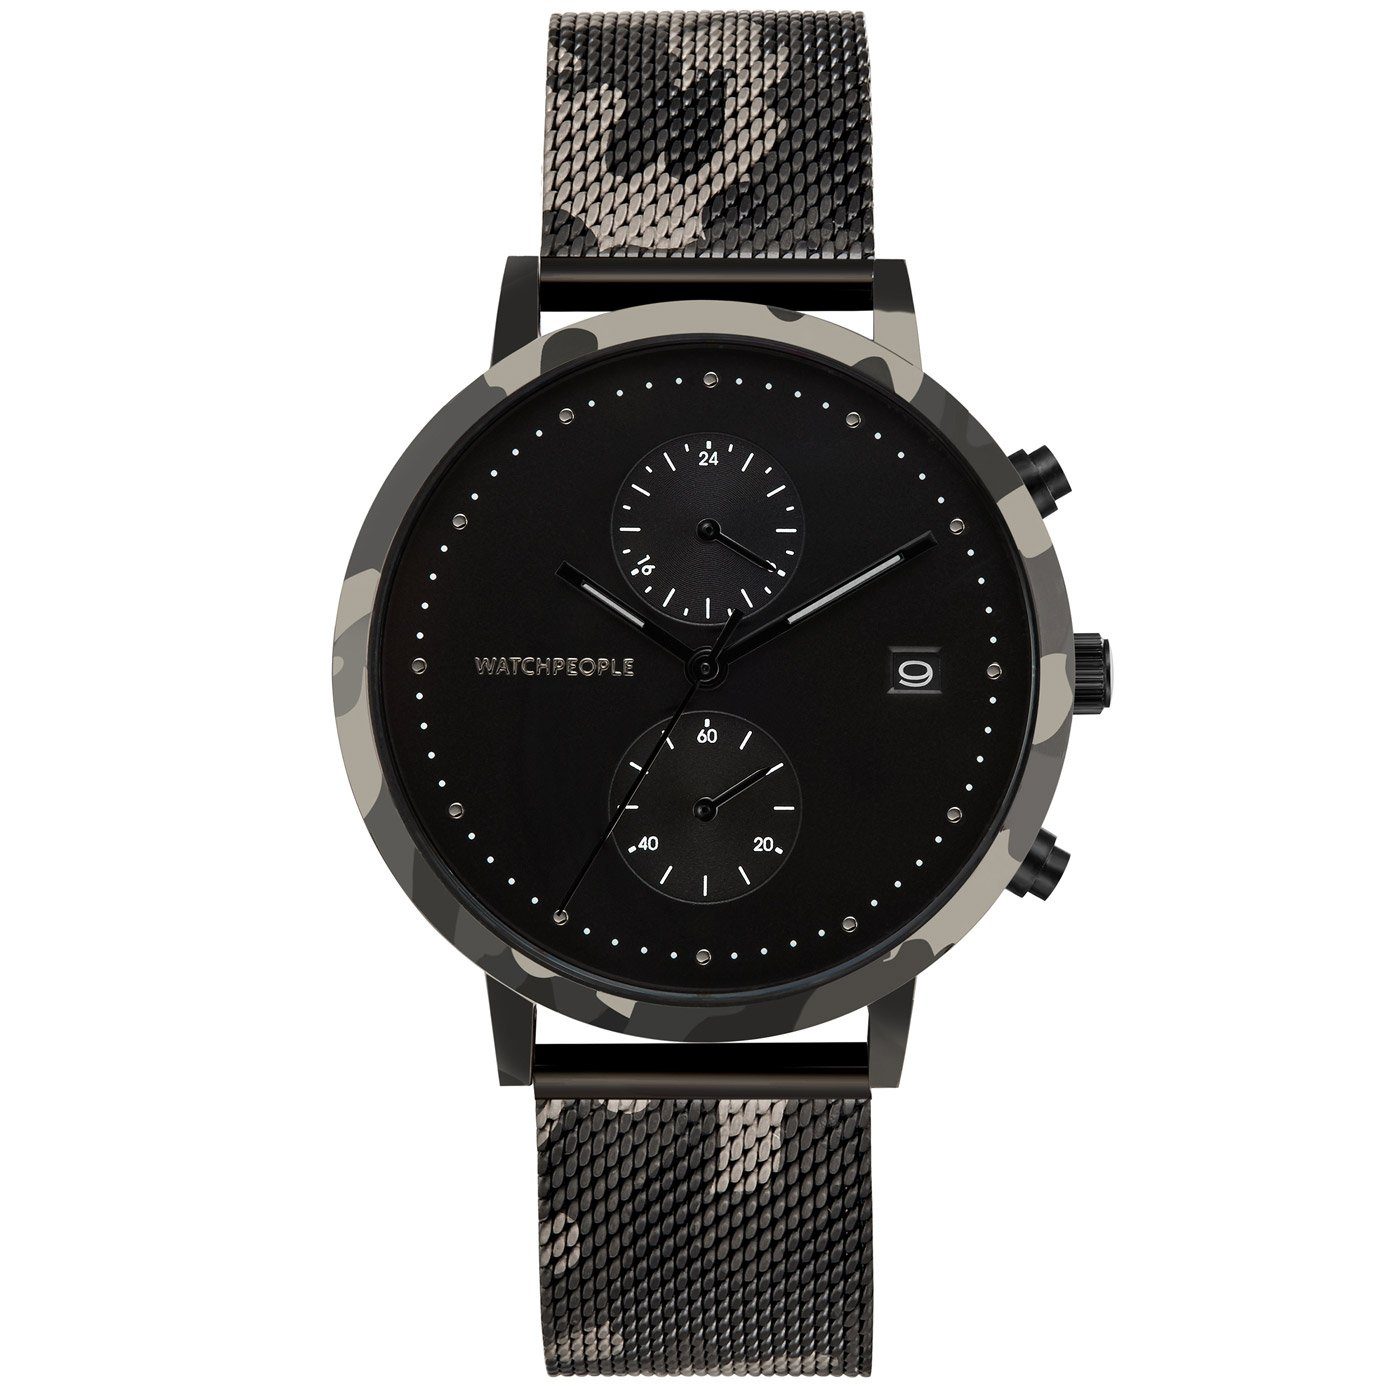 Watchpeople Multifunktionsuhr Cosmo Camouflage WP 051-02, flach, Datumsanzeige, Dual-Time, easy release Band